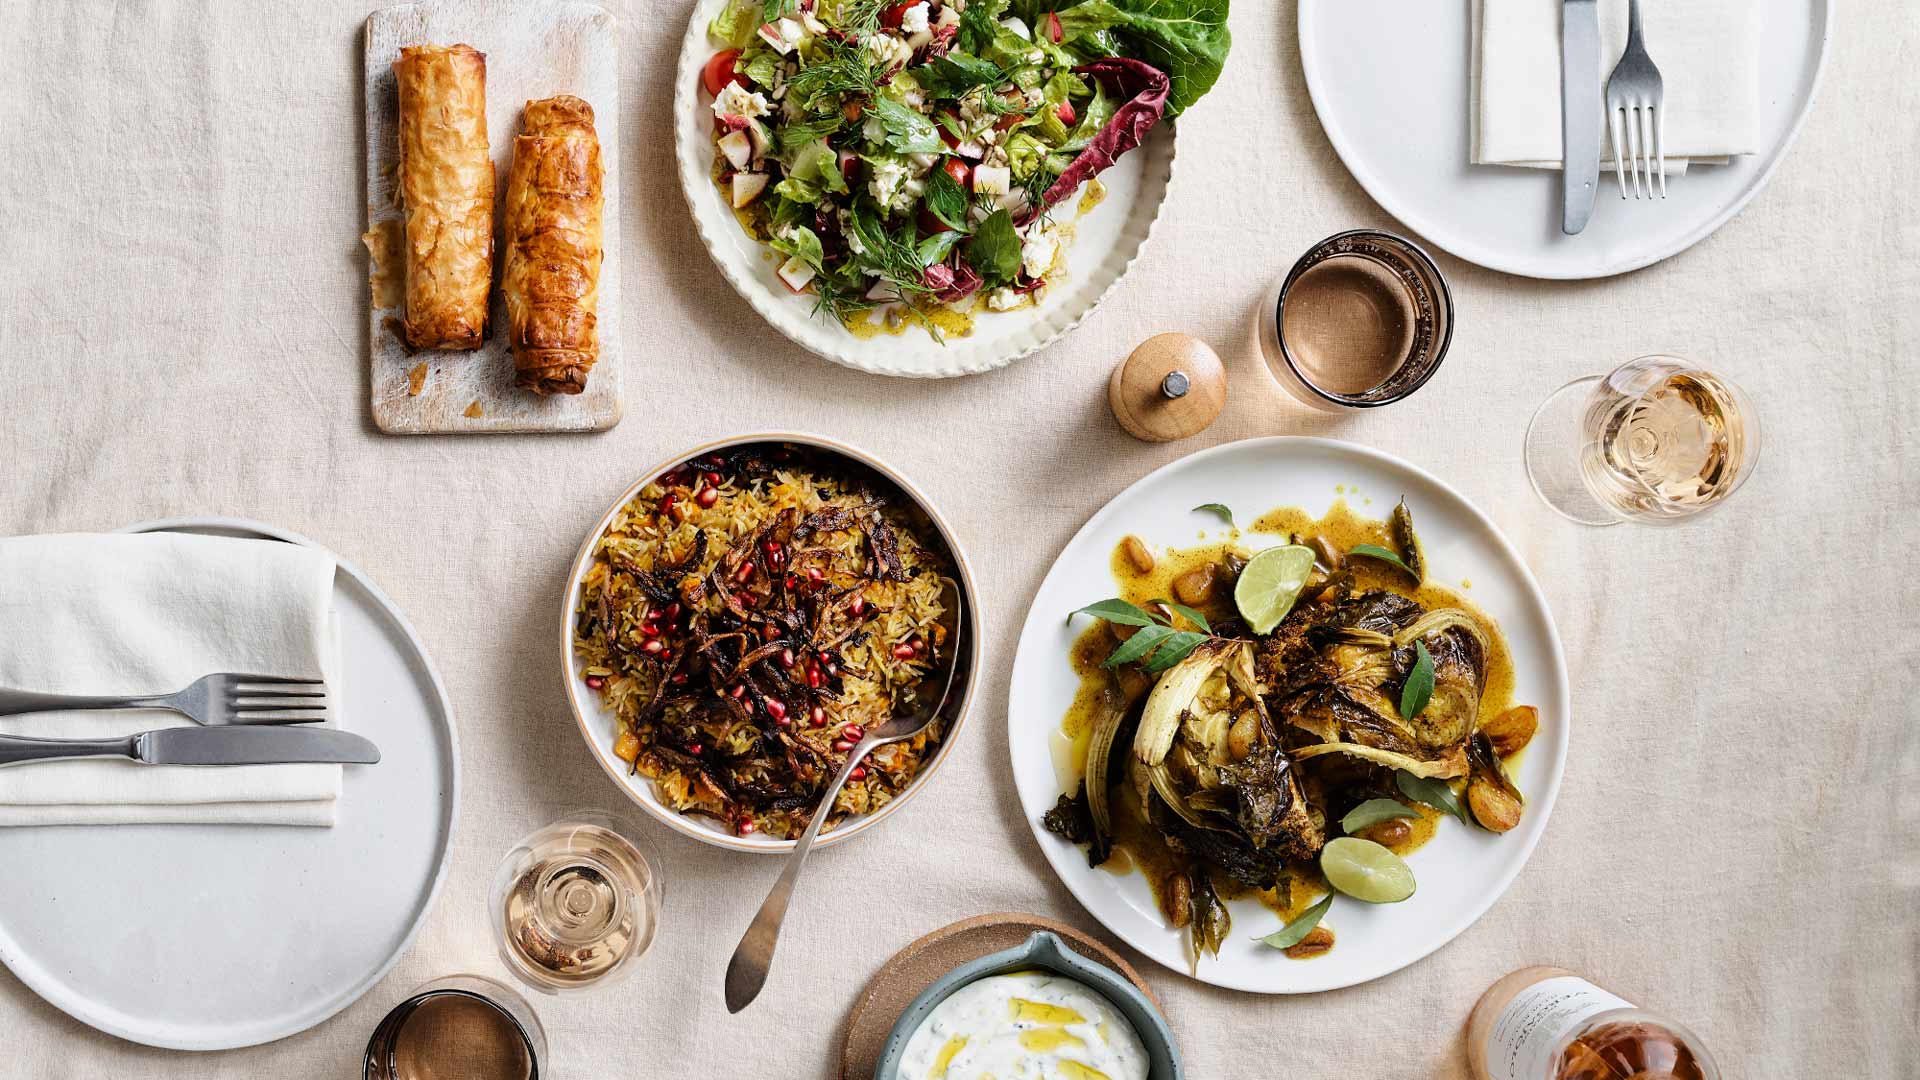 Merivale Is Bringing Its Ready-to-Eat Delivery Meal Service to Melbourne This Winter